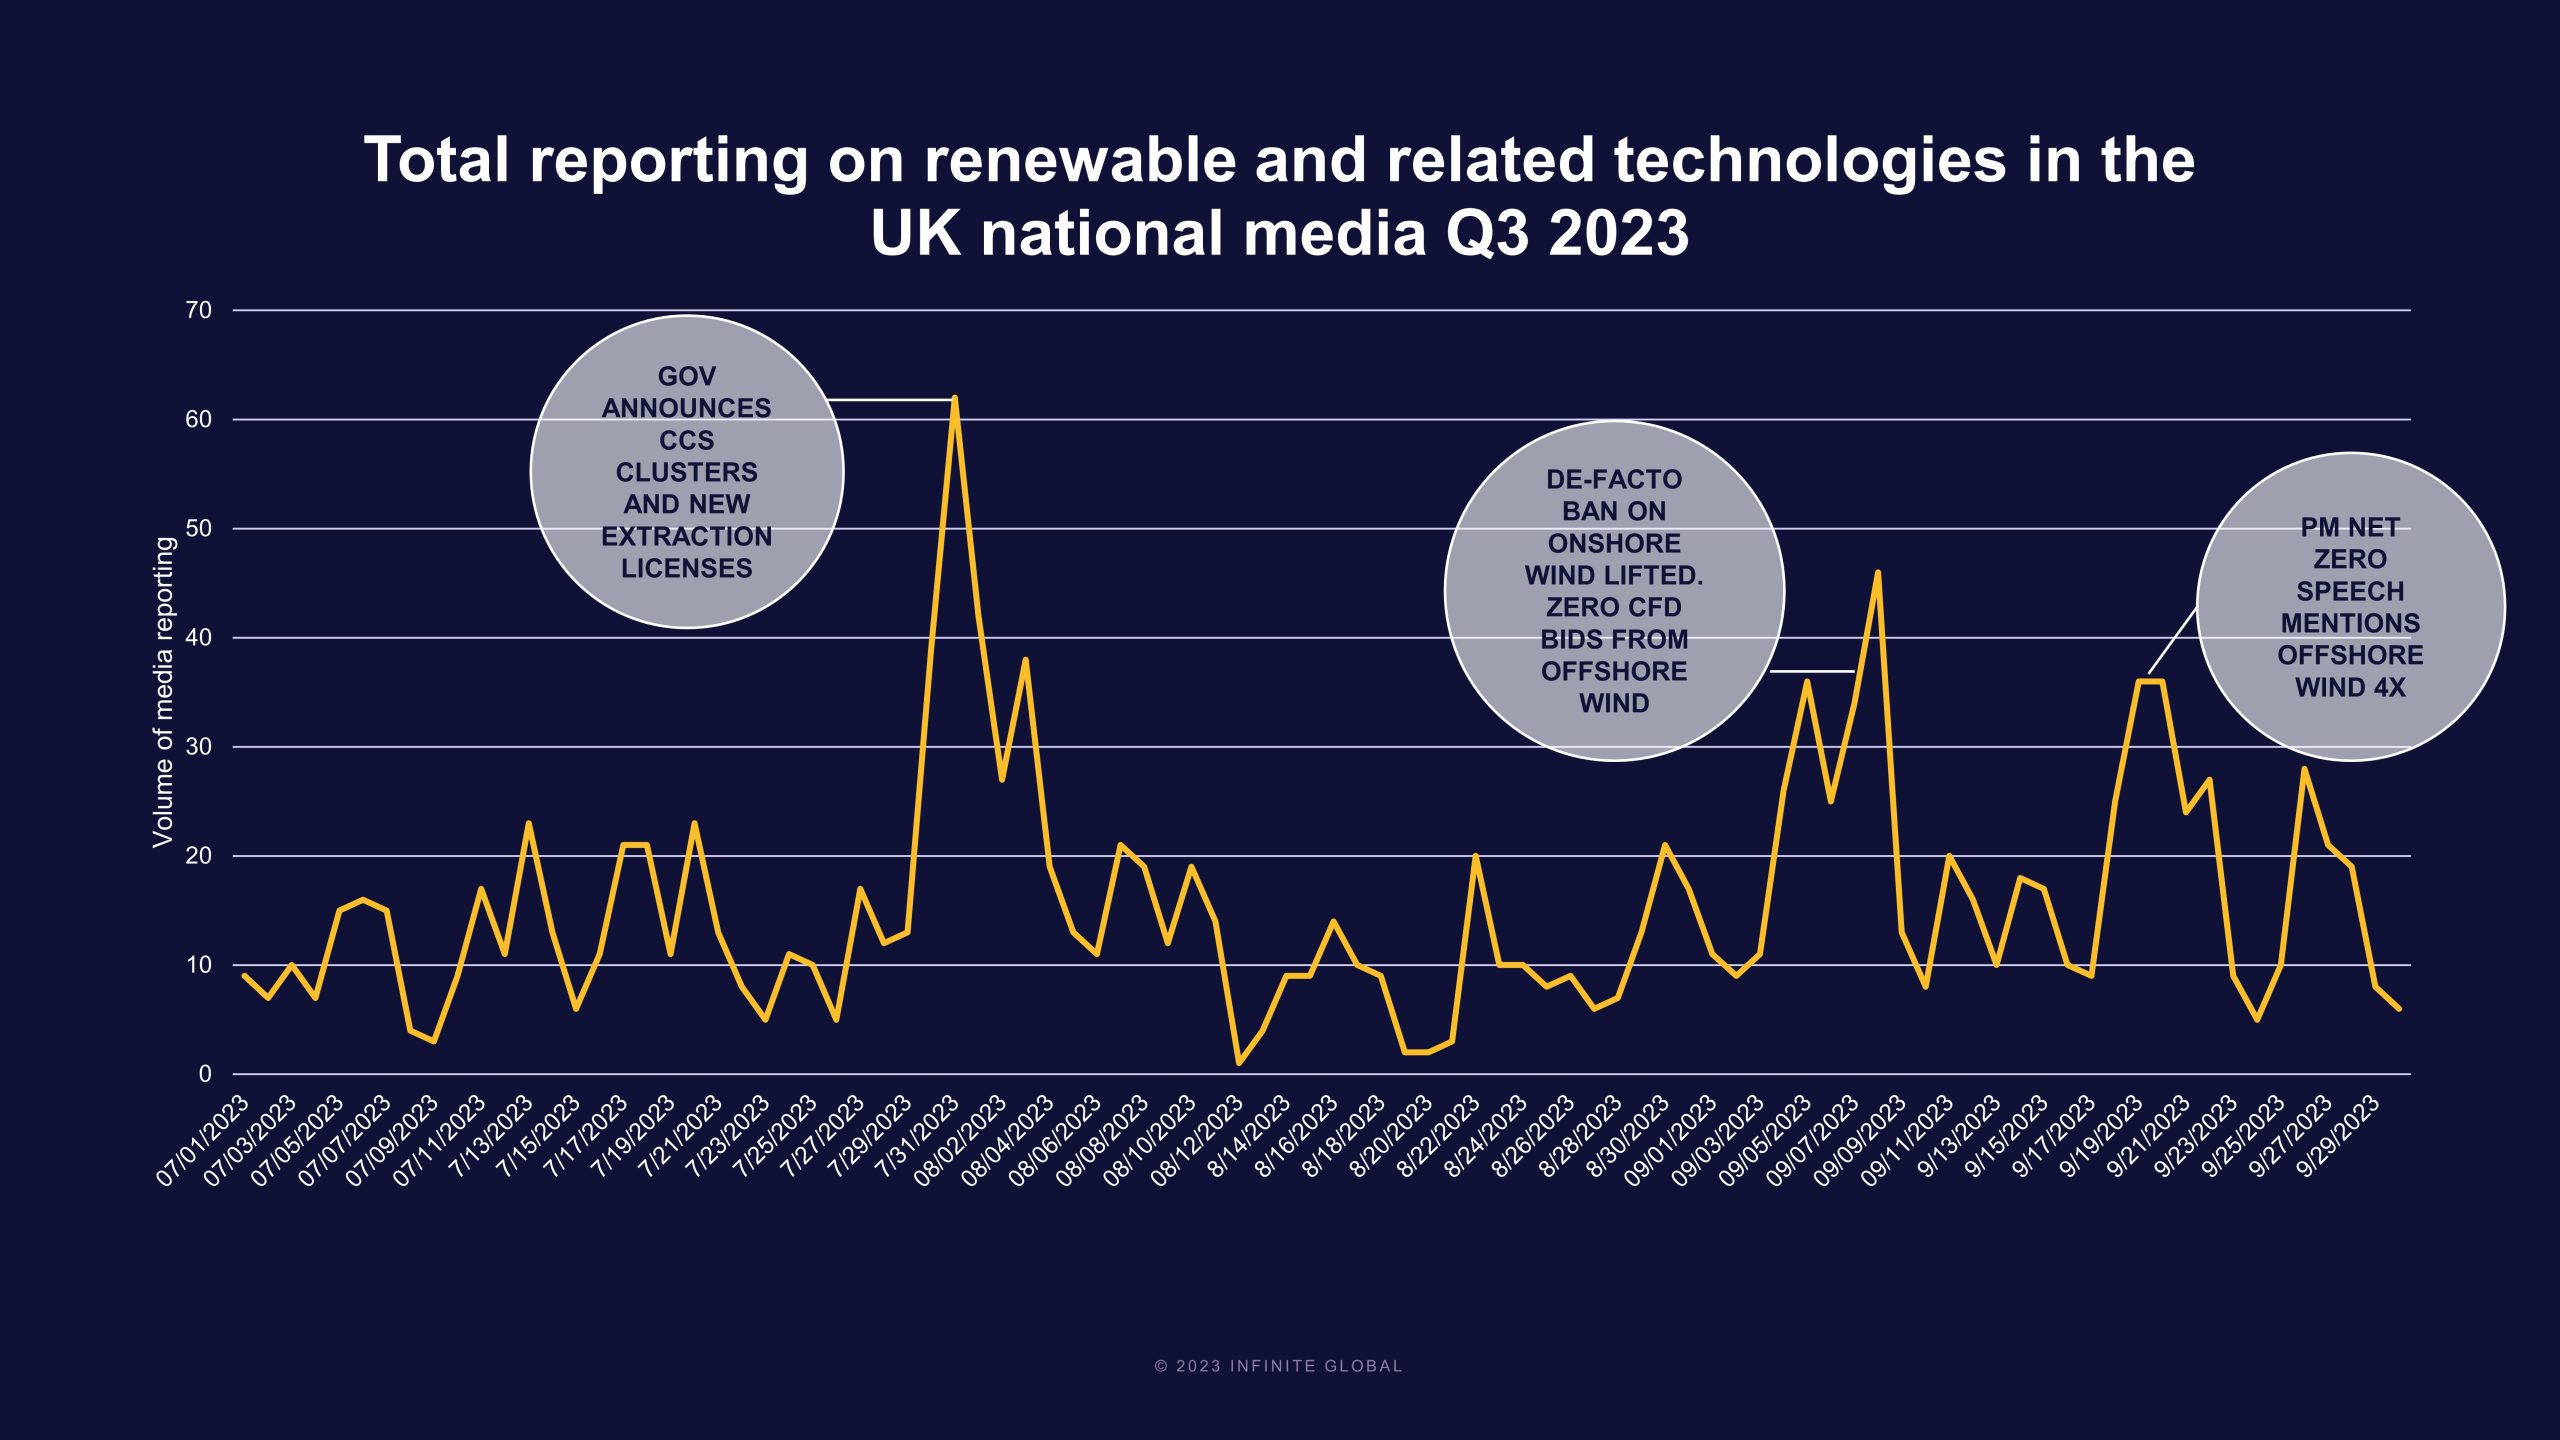 Total reporting on renewable and related technologies in the UK national media Q3 2023